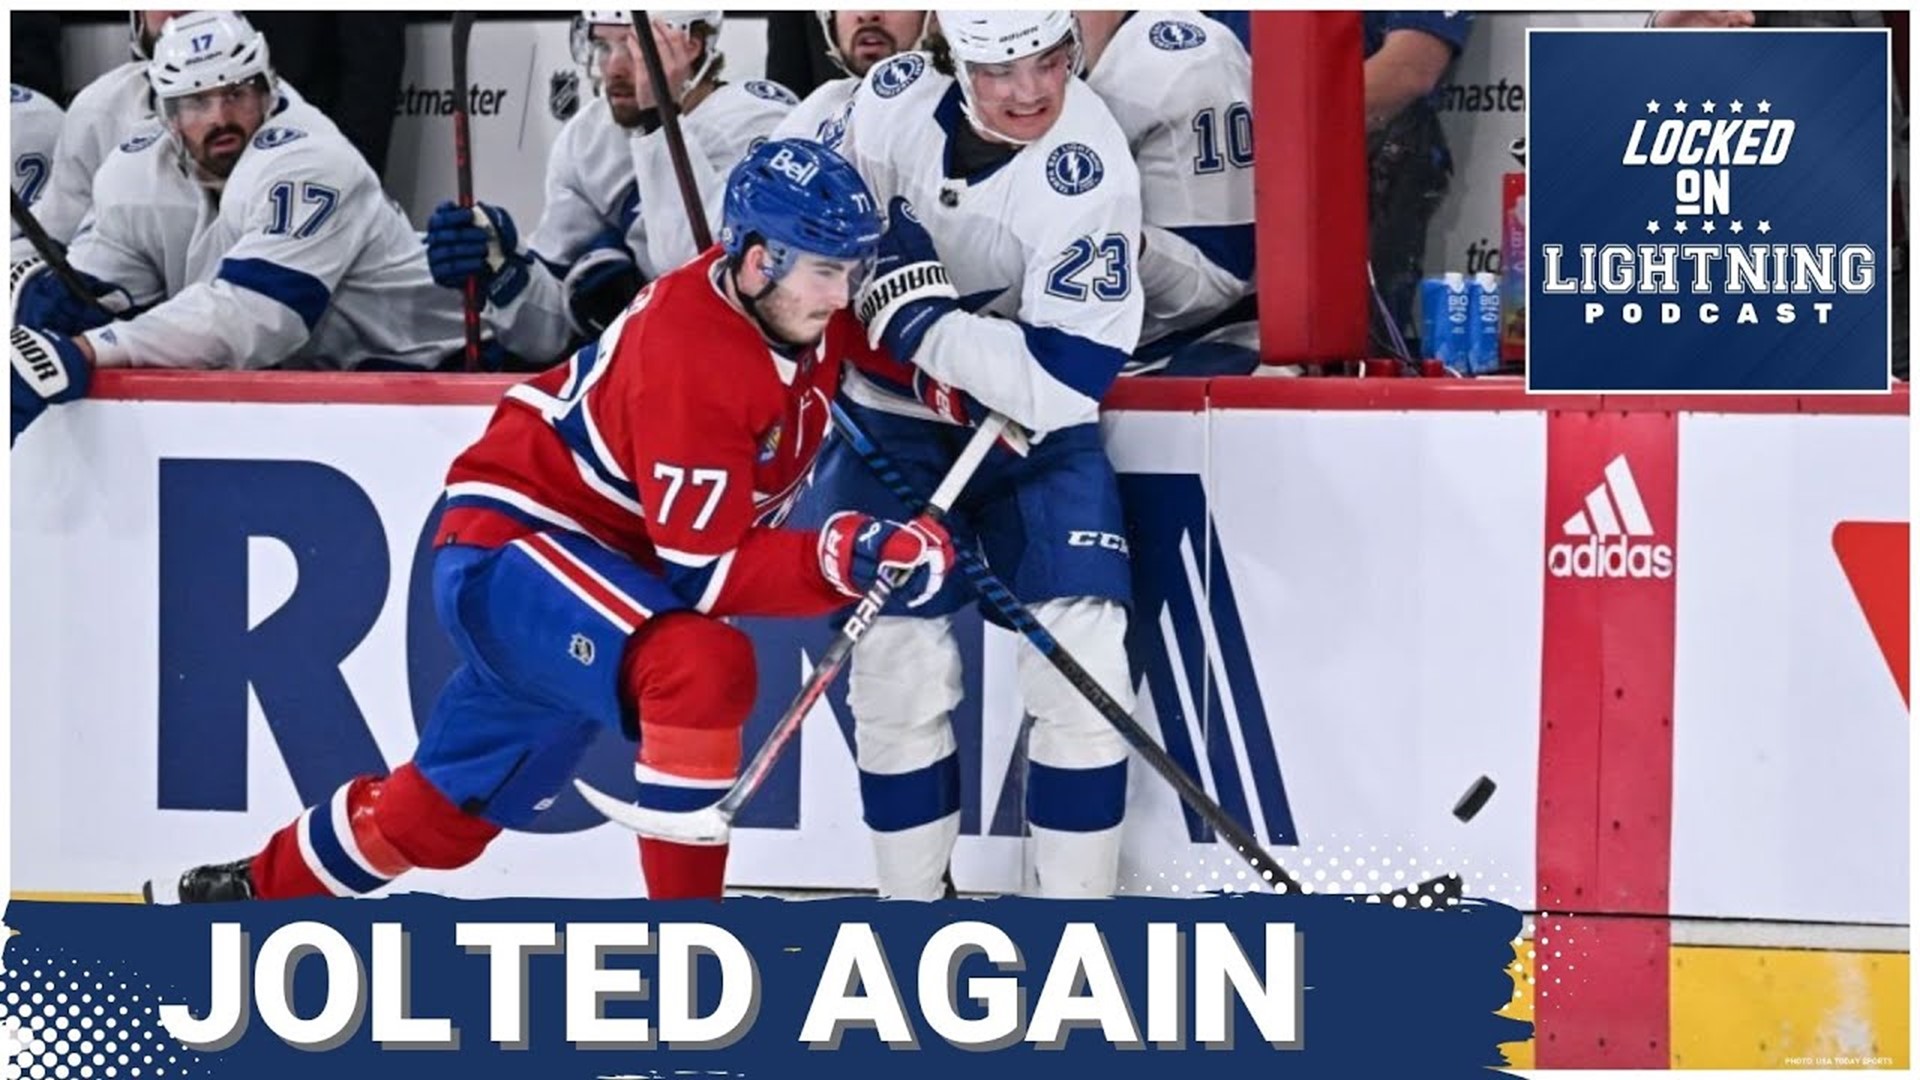 The Lightning dropped yet another game Tuesday night, with a 3-2 loss on the road in Montreal. With 10 games left in the season, is there concern?